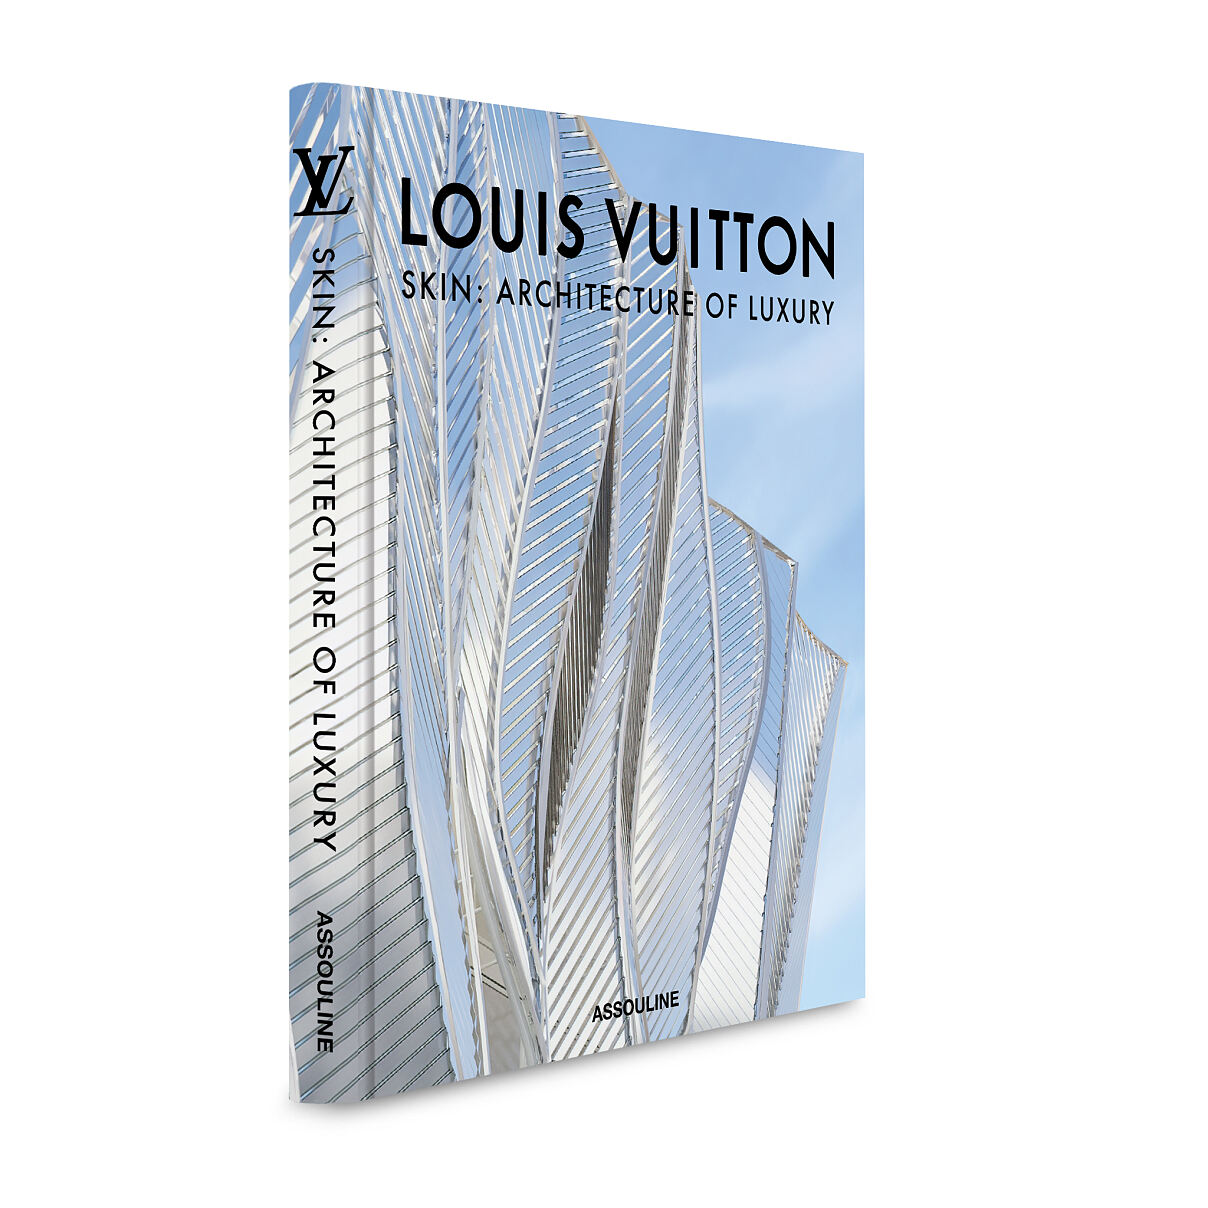 LV_Louis Vuitton Skin - The Architecture of Luxury_Cover (5)